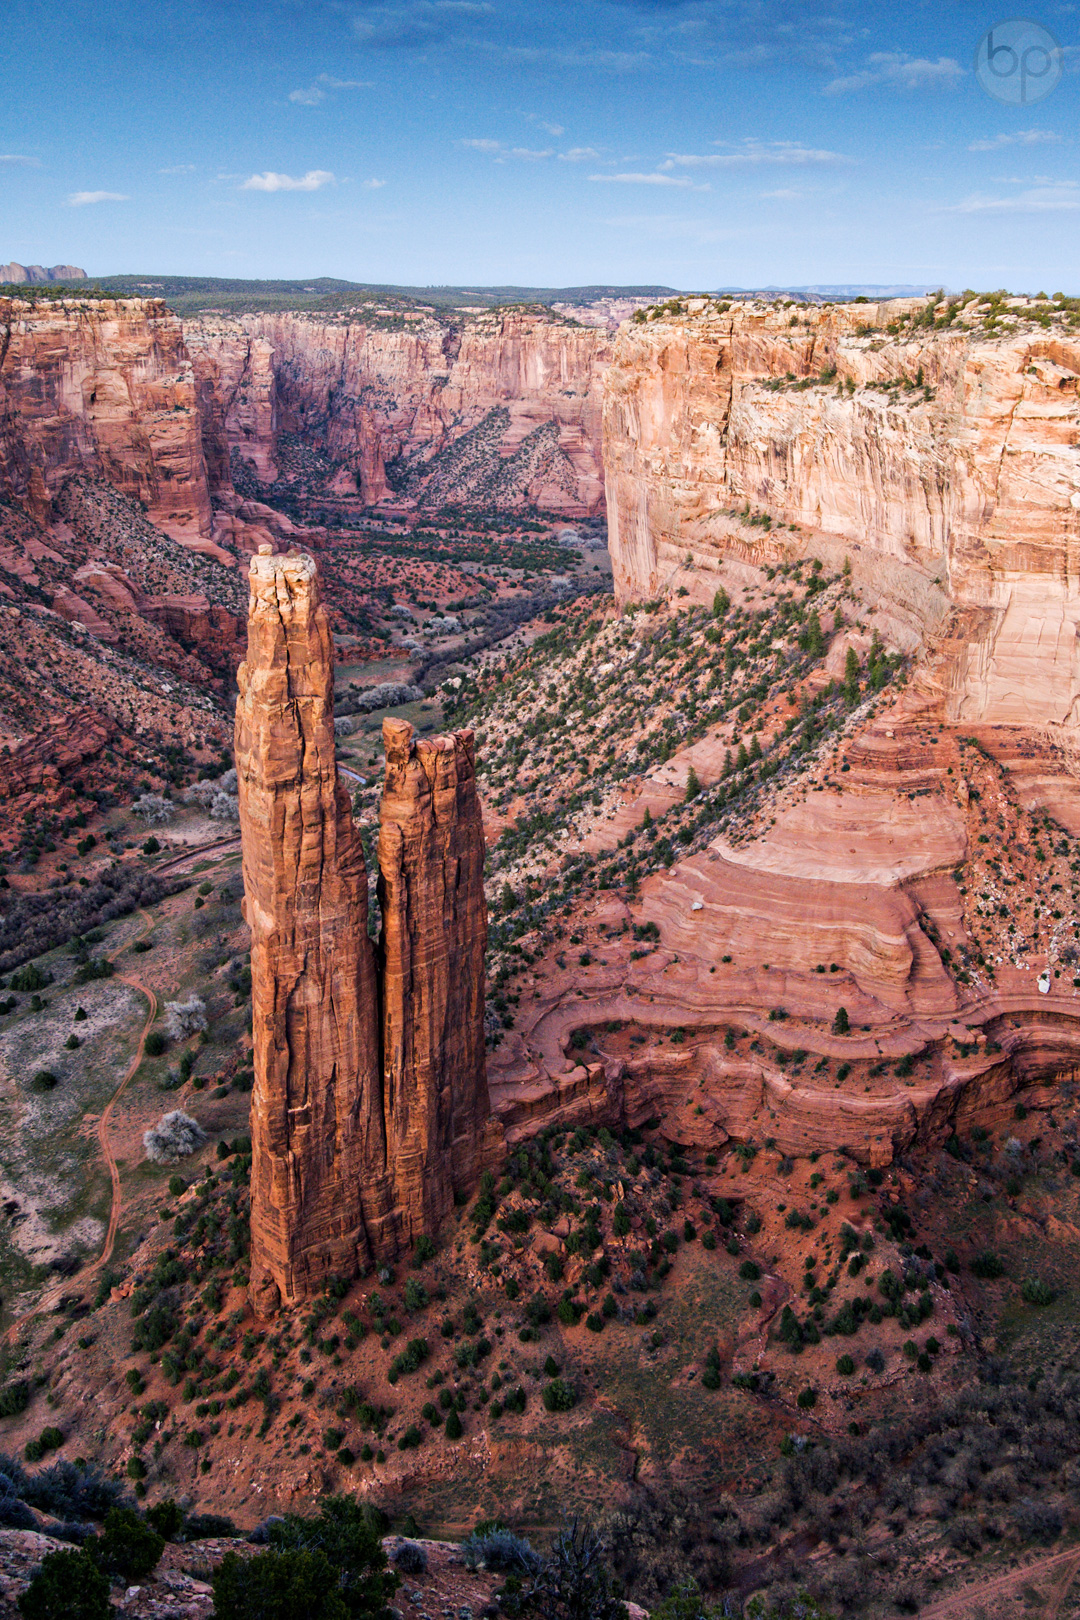 Spider Rock - Canyon de Chelly National Monument